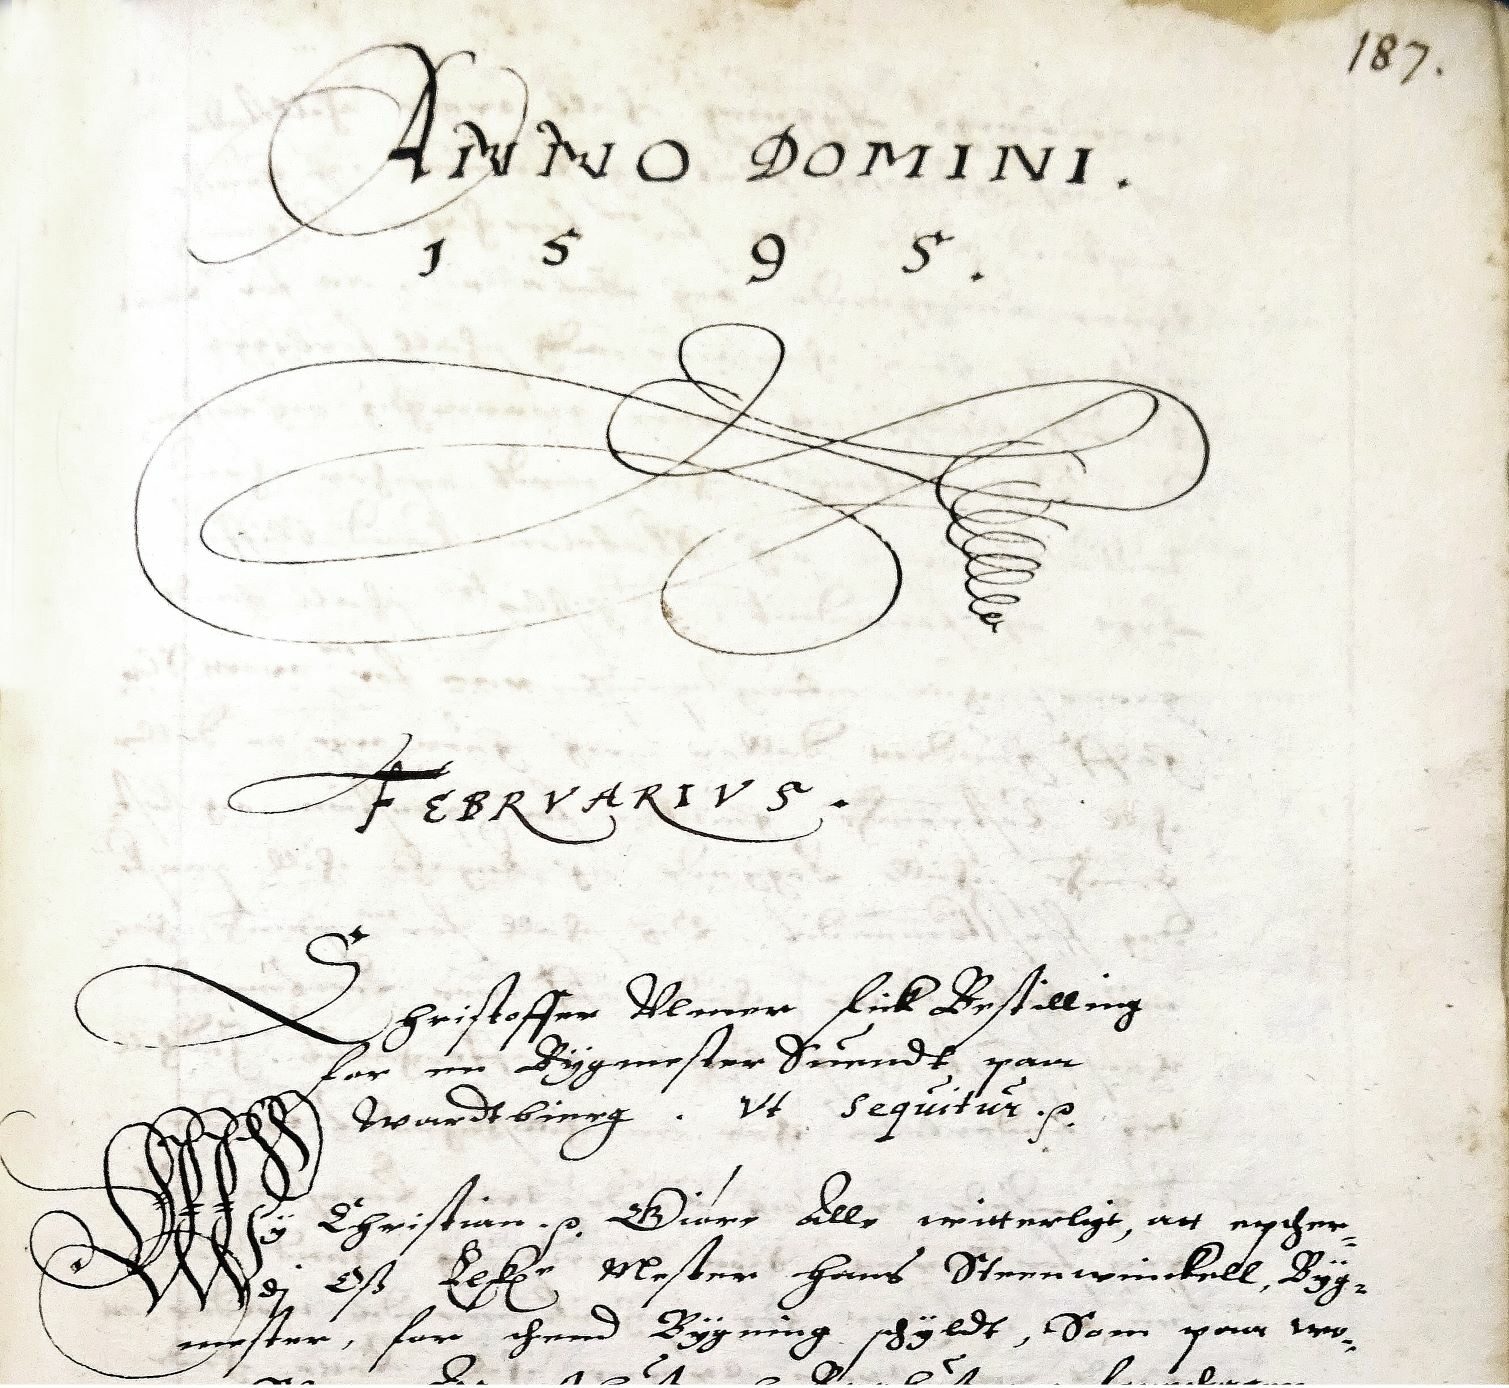 In 1594, the Government wrote in a letter to the nobility in Varberg County that they were now working on an “important and big buildning for the fortification of the Varberg Castle”. Fortress construction was in full progress. A letter from Christian IV to Steenwinckel, dated 2 February 1595. Steenwinckel is urged to ensure that the buildings are “warlike and durabledurable and permanent”.